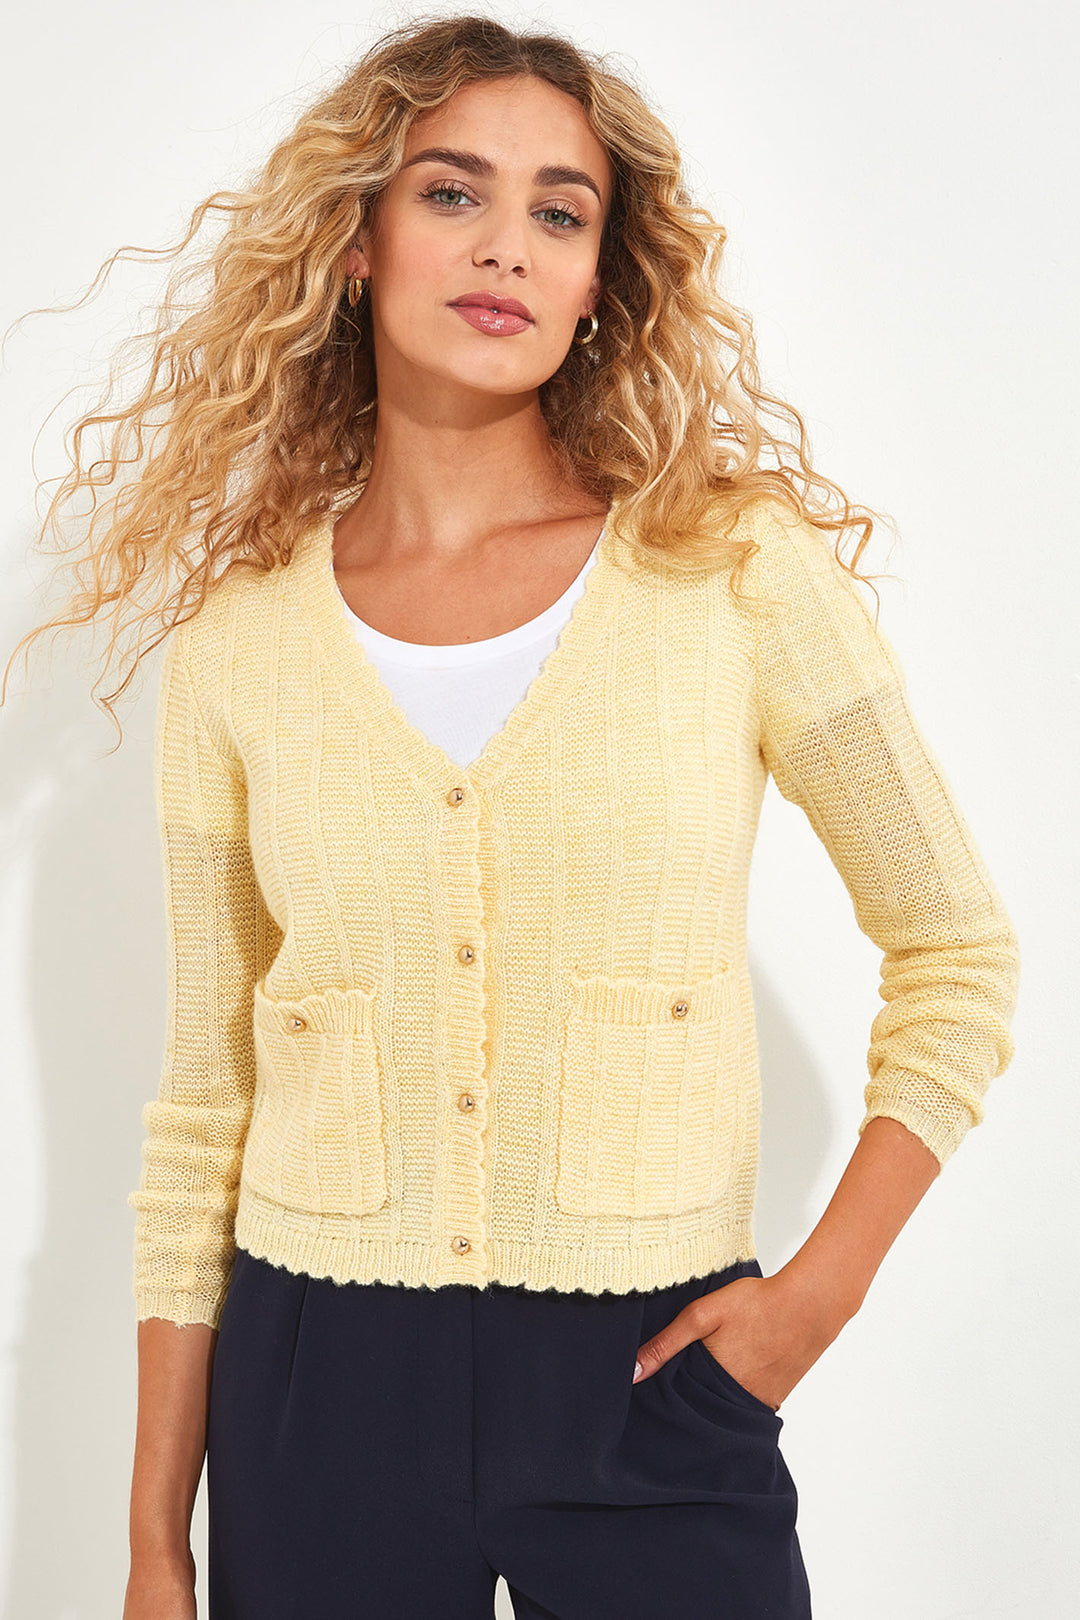 Joe Browns WK710A Lula Yellow V-Neck Cardigan - Experience Boutique